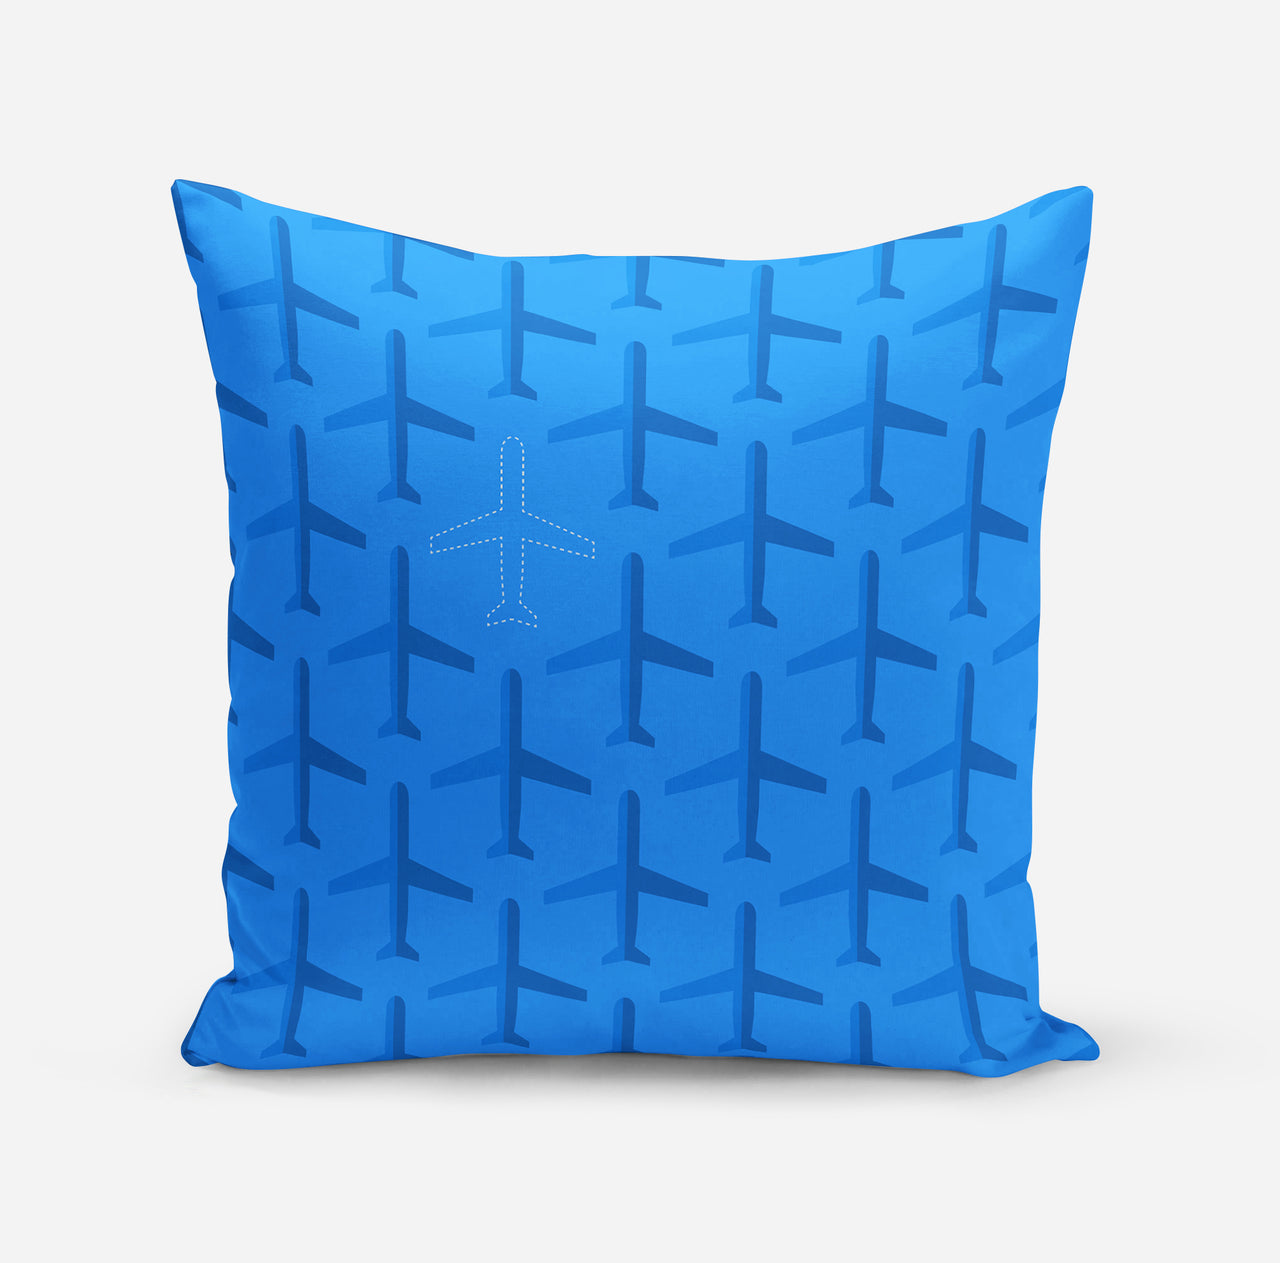 Blue Seamless Airplanes Designed Pillows